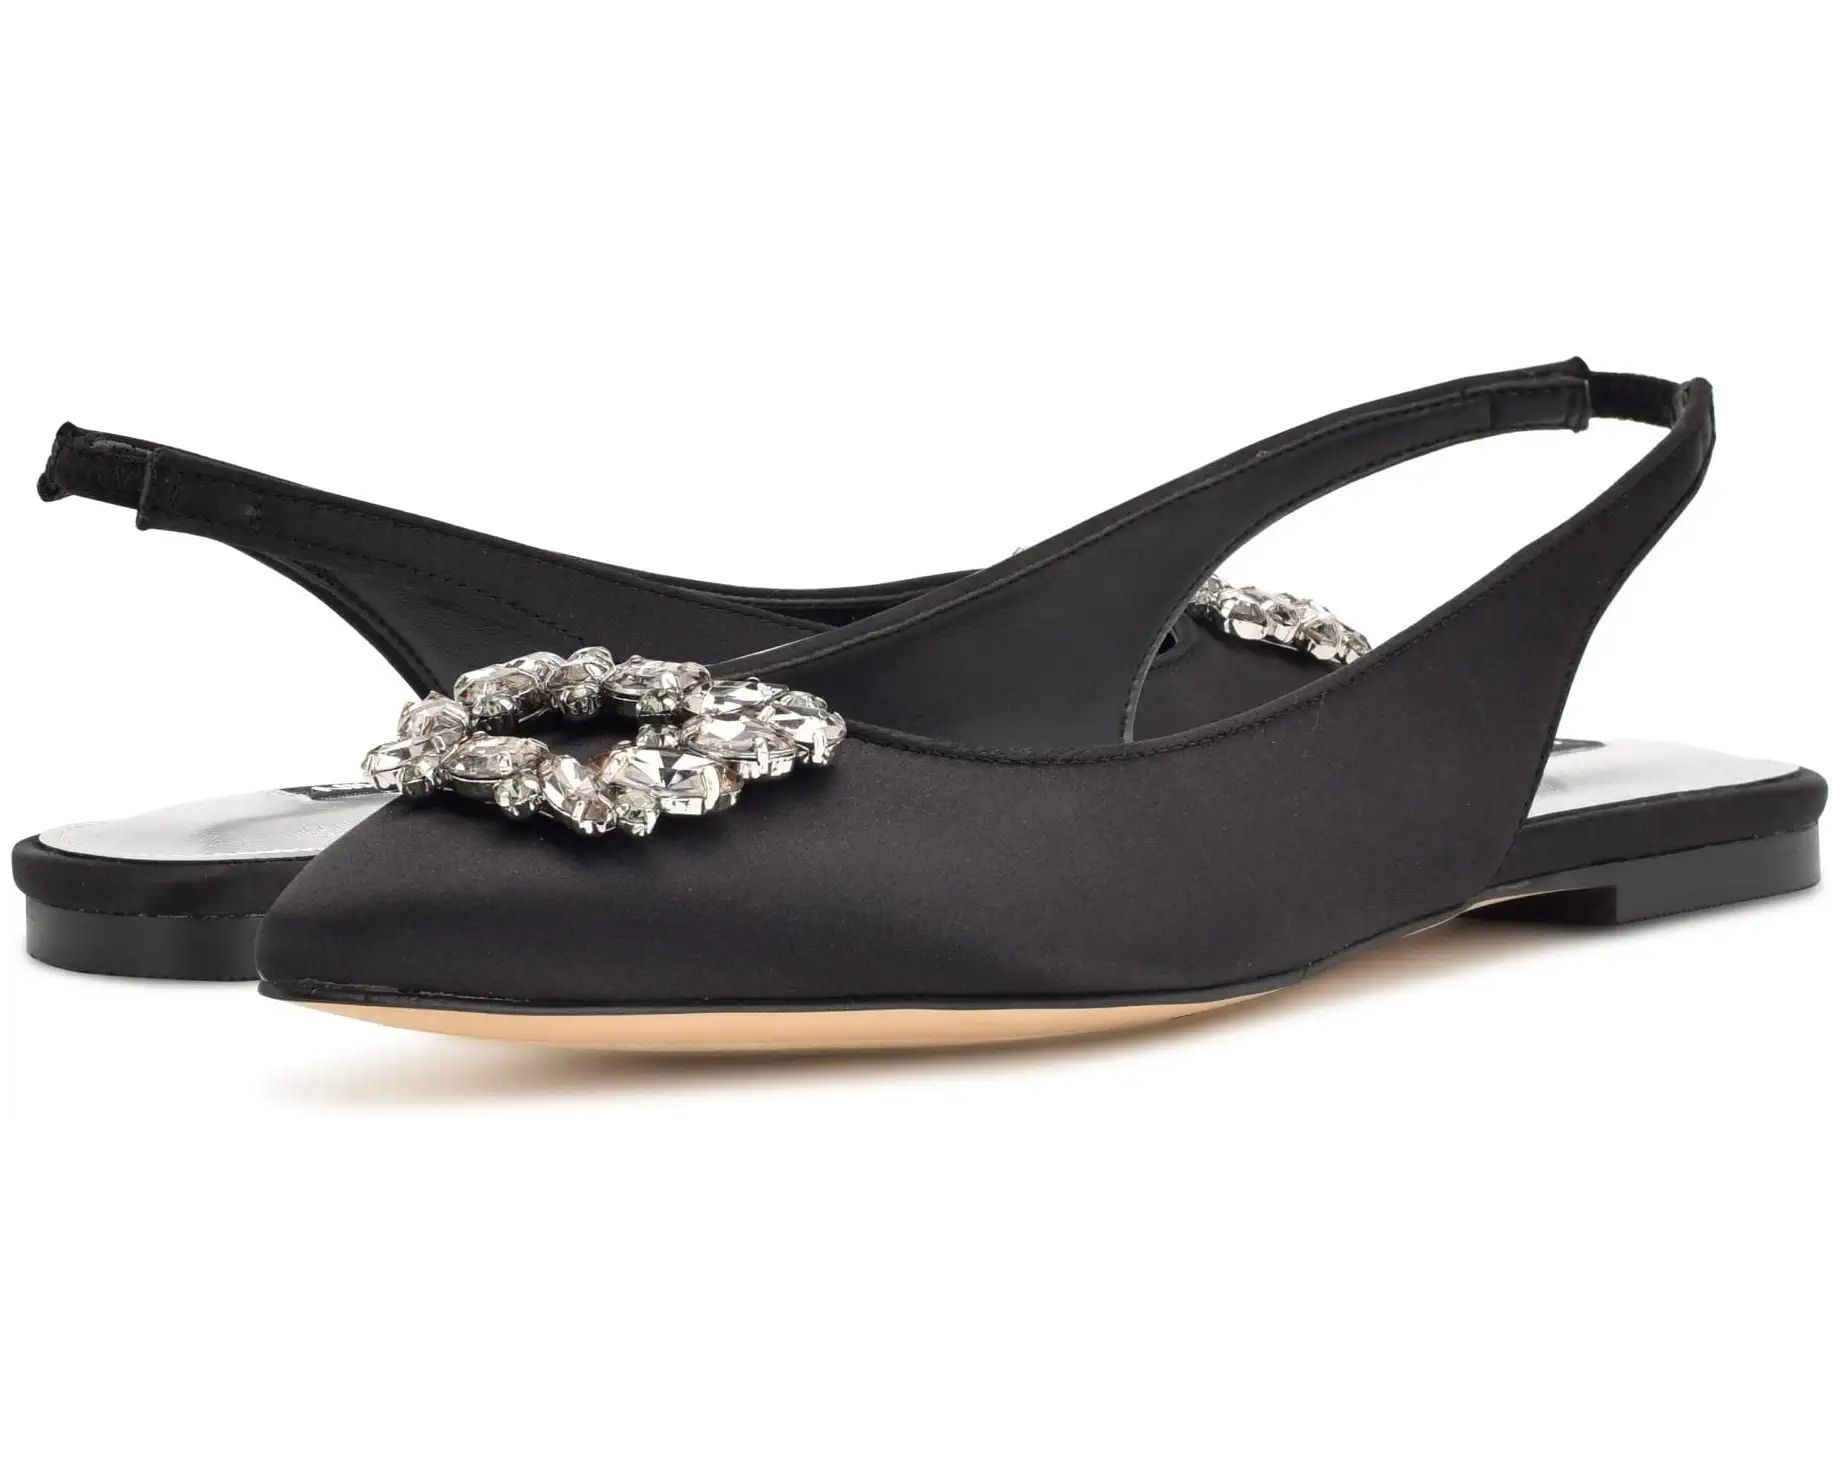 Nine West Blingy 2 | Zappos